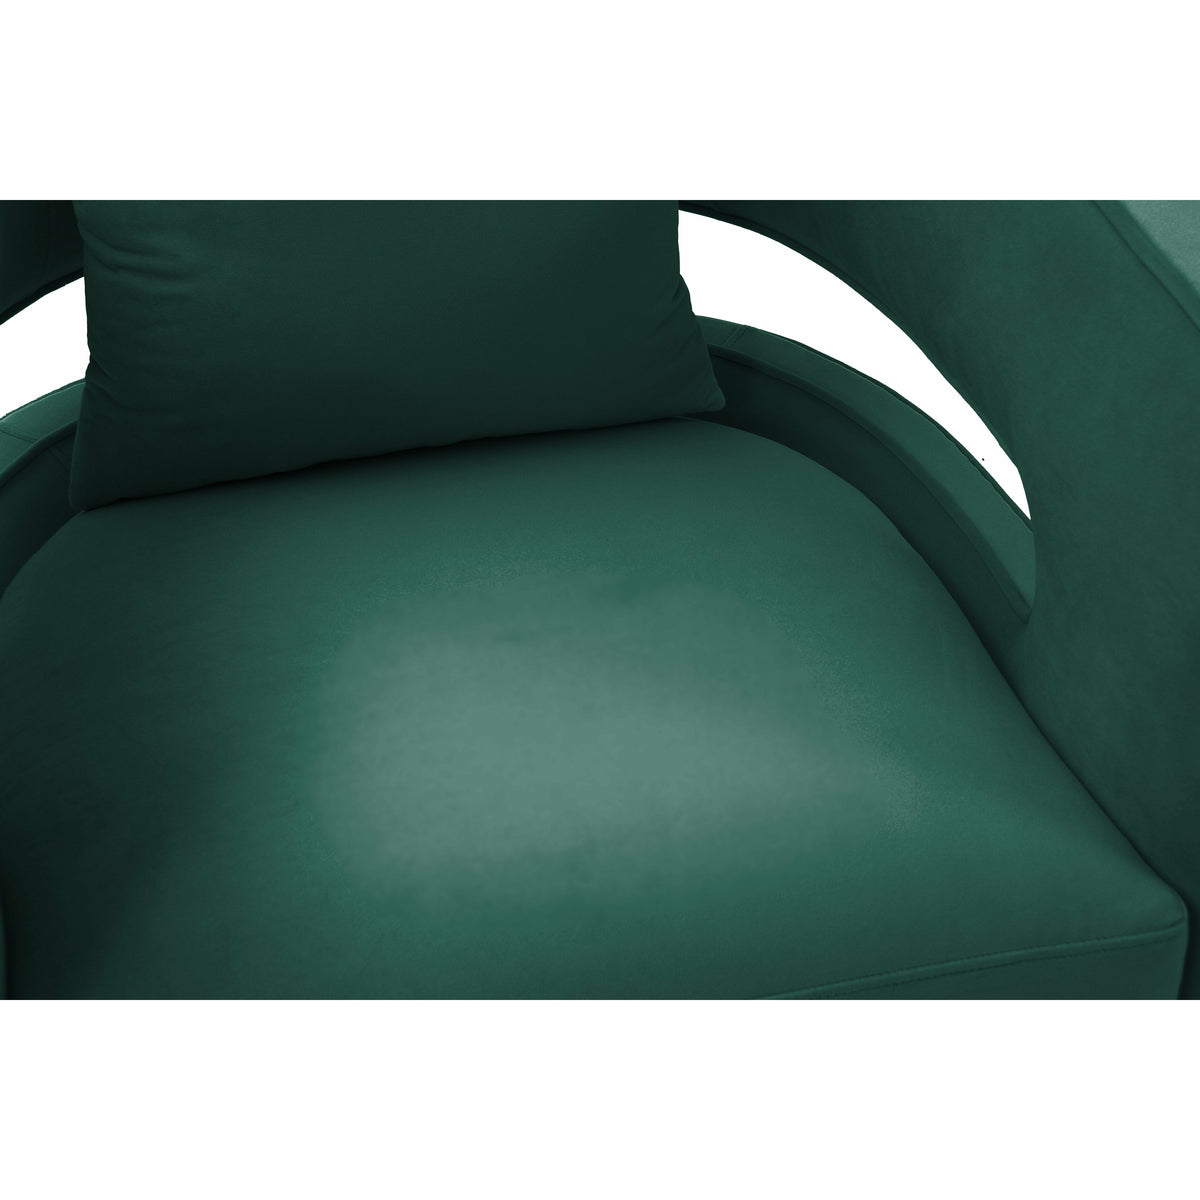 Kennedy Forest Green Swivel Chair - Be Bold Furniture